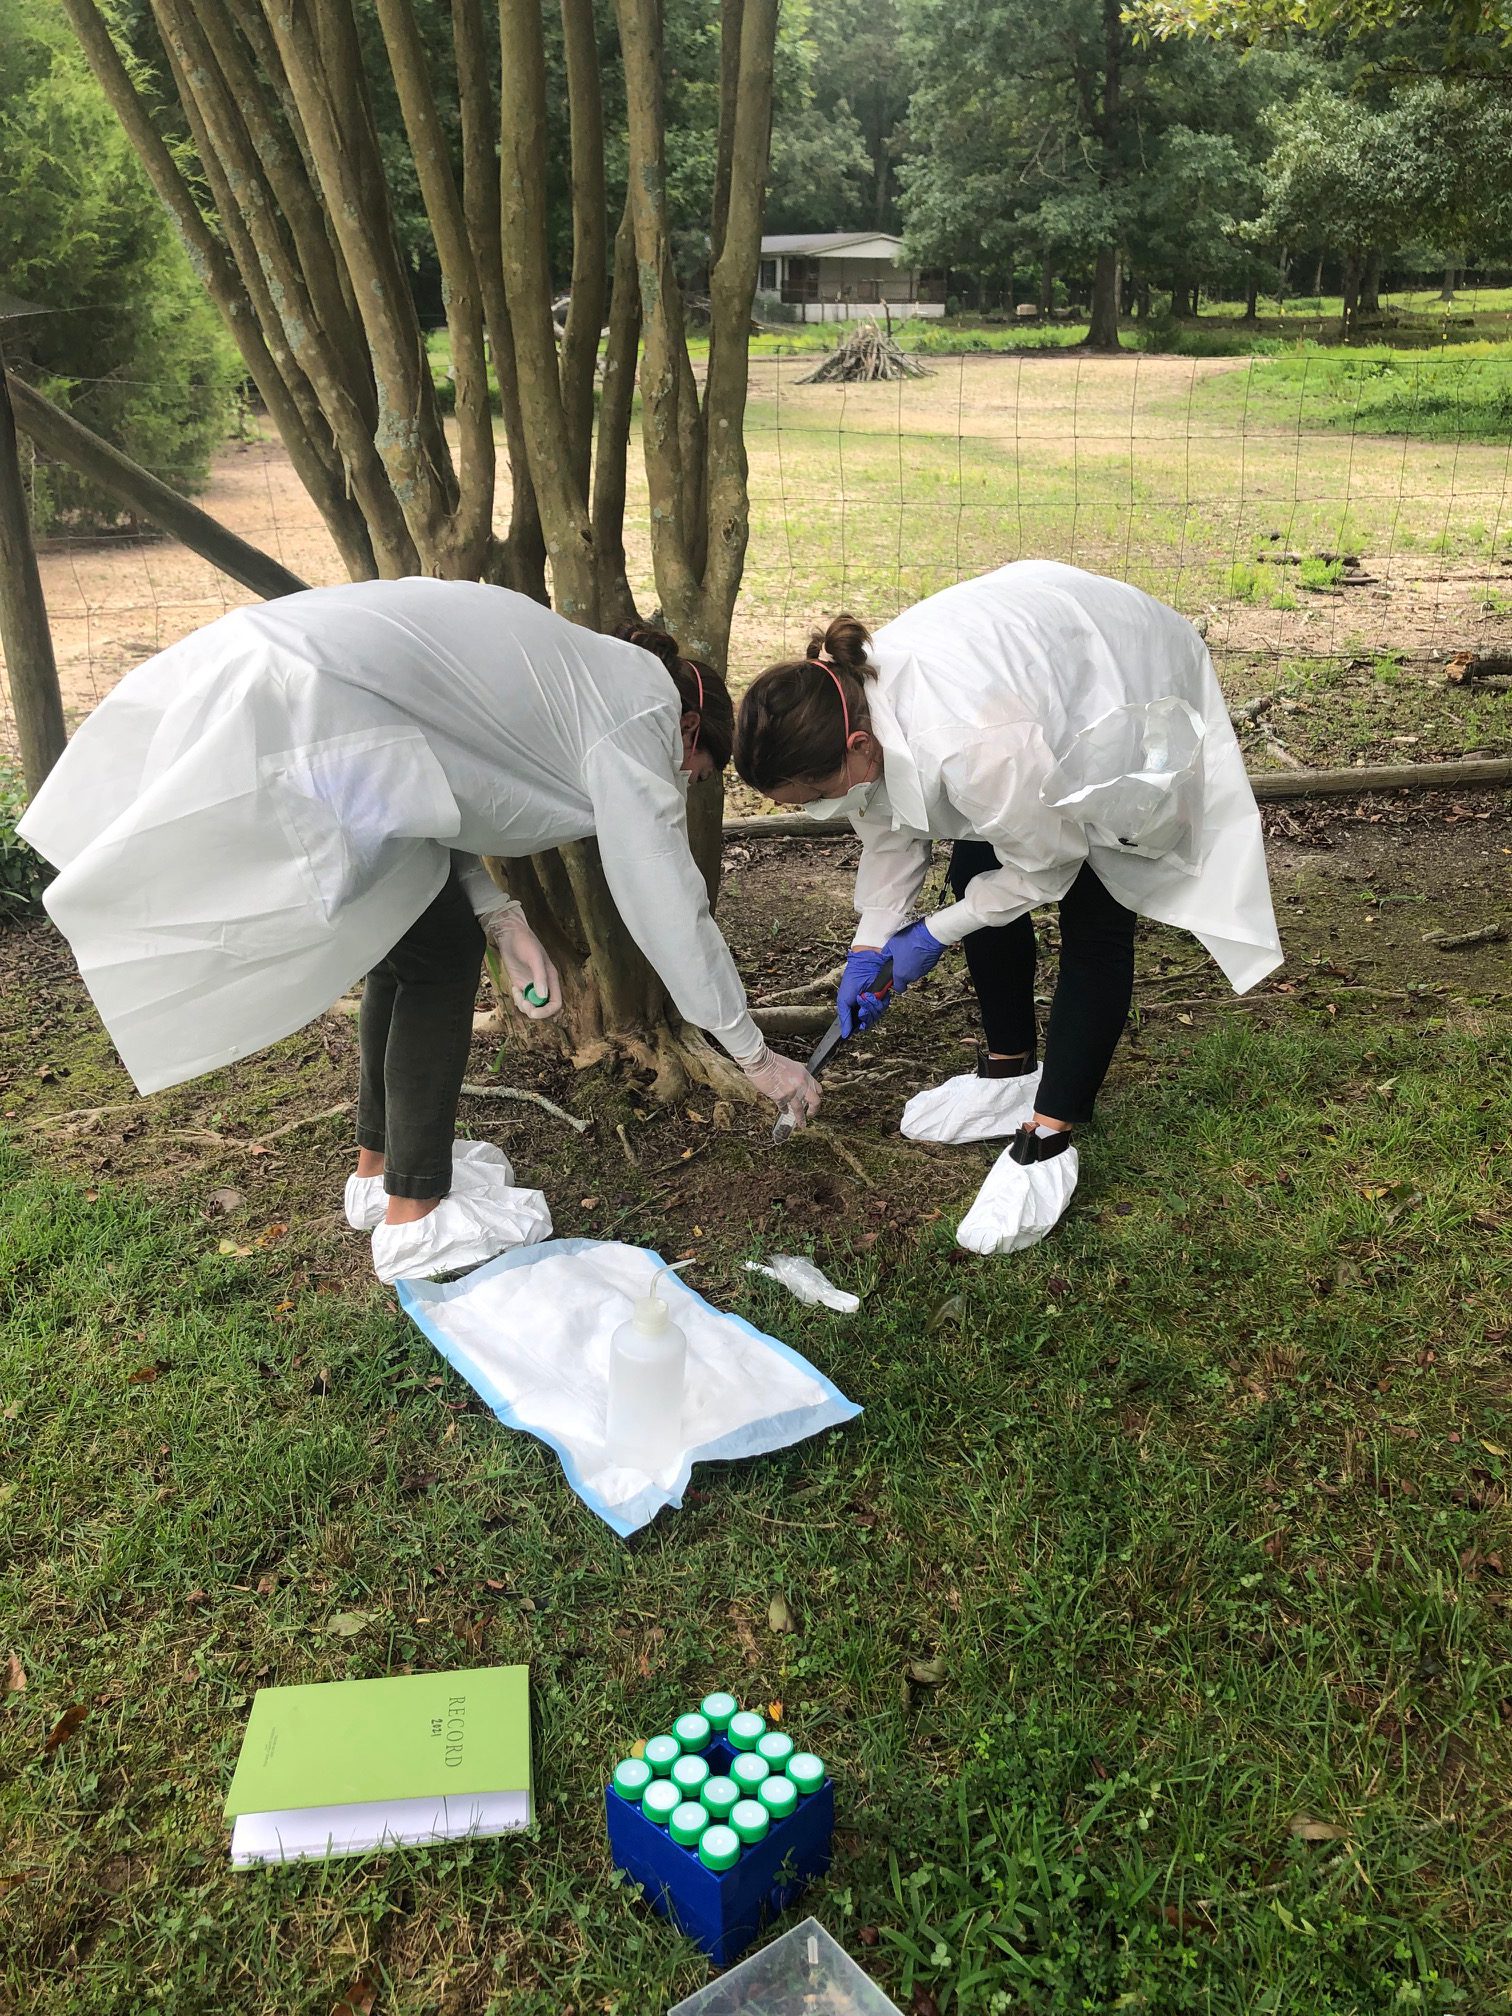 EIS Officer Julia Petras (right) and microbiologist Mindy Elrod (left) collect soil samples during an Epi-Aid in Georgia as part of the multi-state melioidosis outbreak investigation in August 2021.